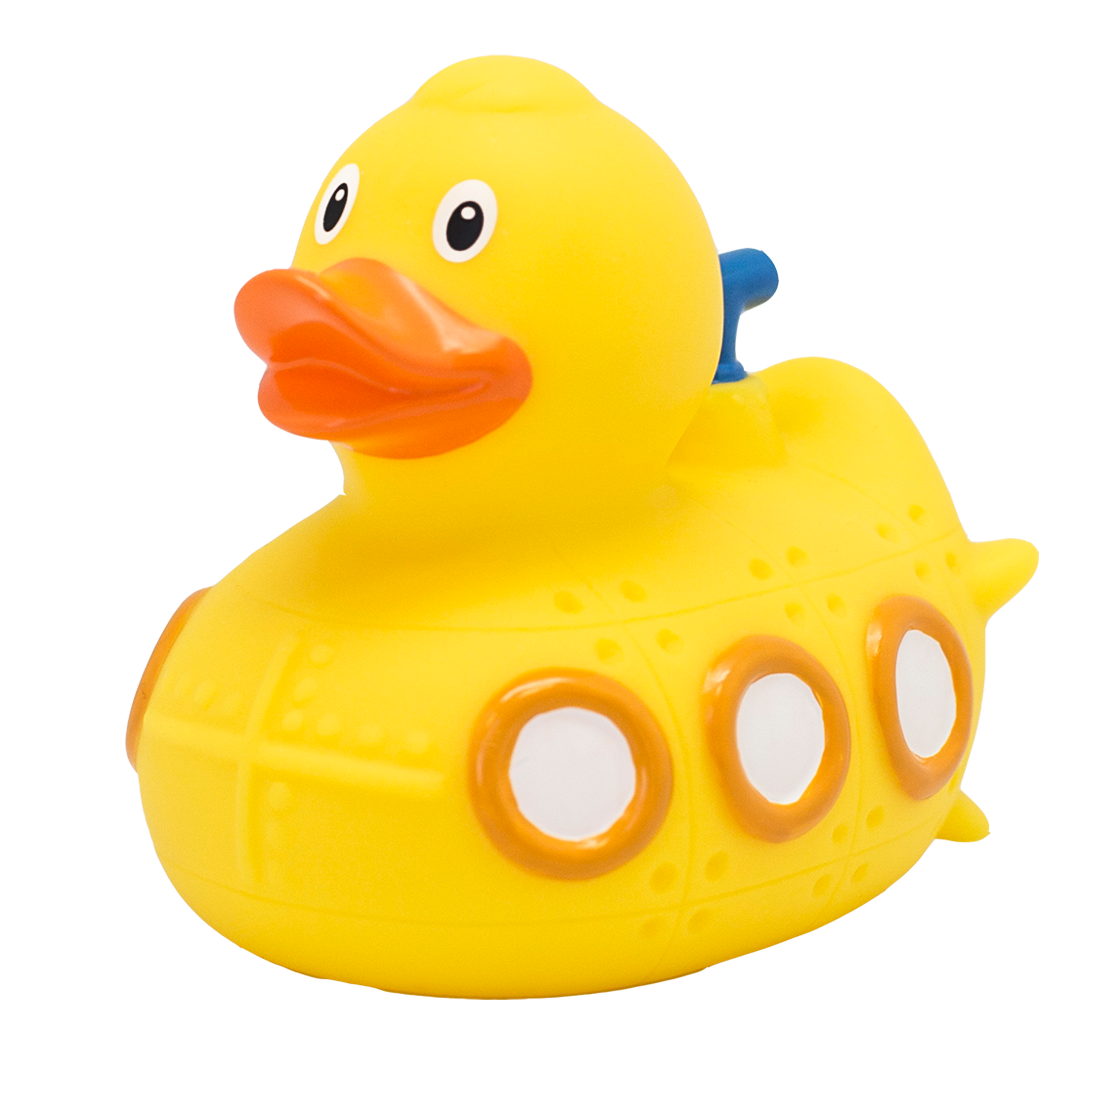 LILALU - SHARE HAPPINESS - Submarine rubber duck